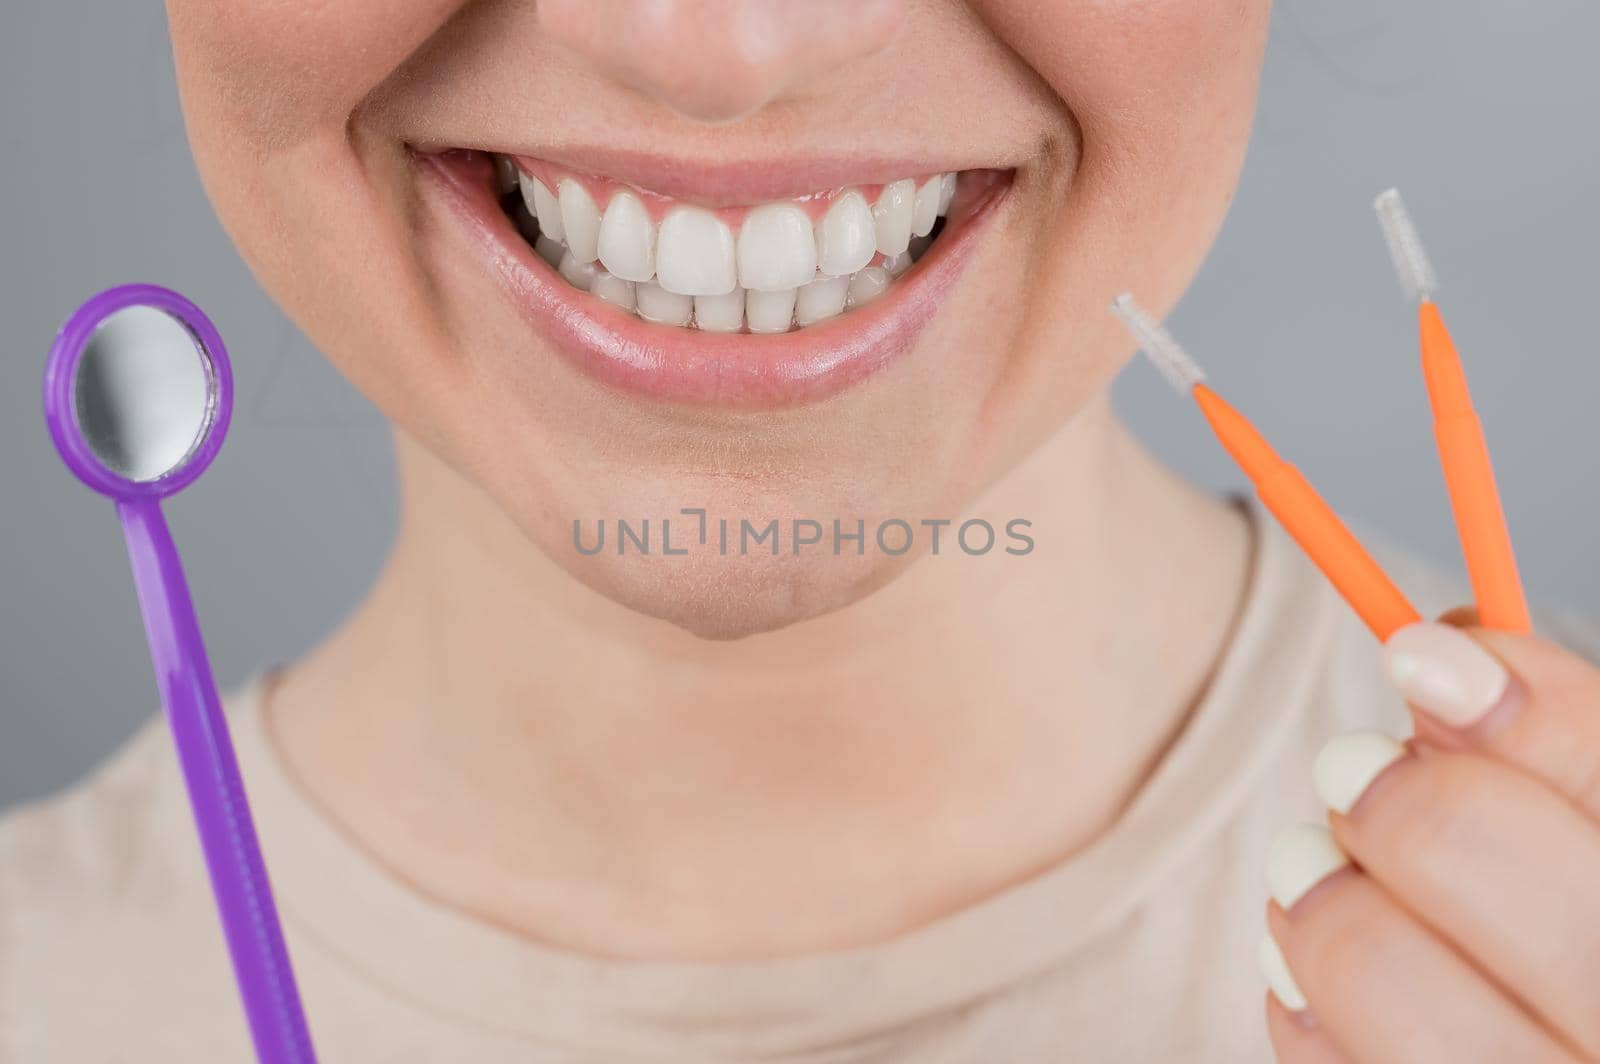 Close-up portrait of a smiling woman holding a brush and a dental mirror. Widescreen.